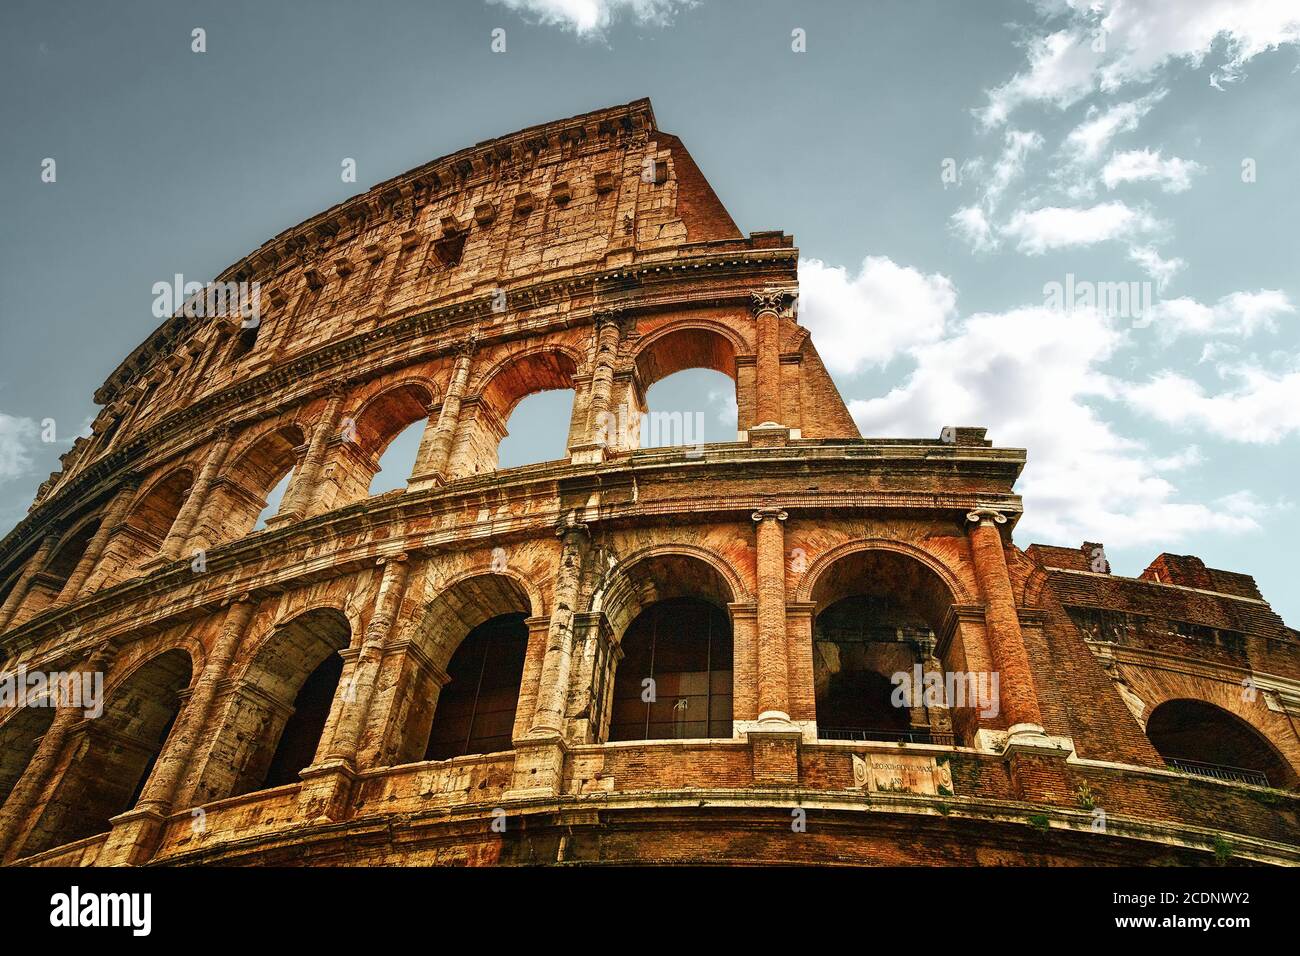 Colosseum in Rome Italy Stock Photo